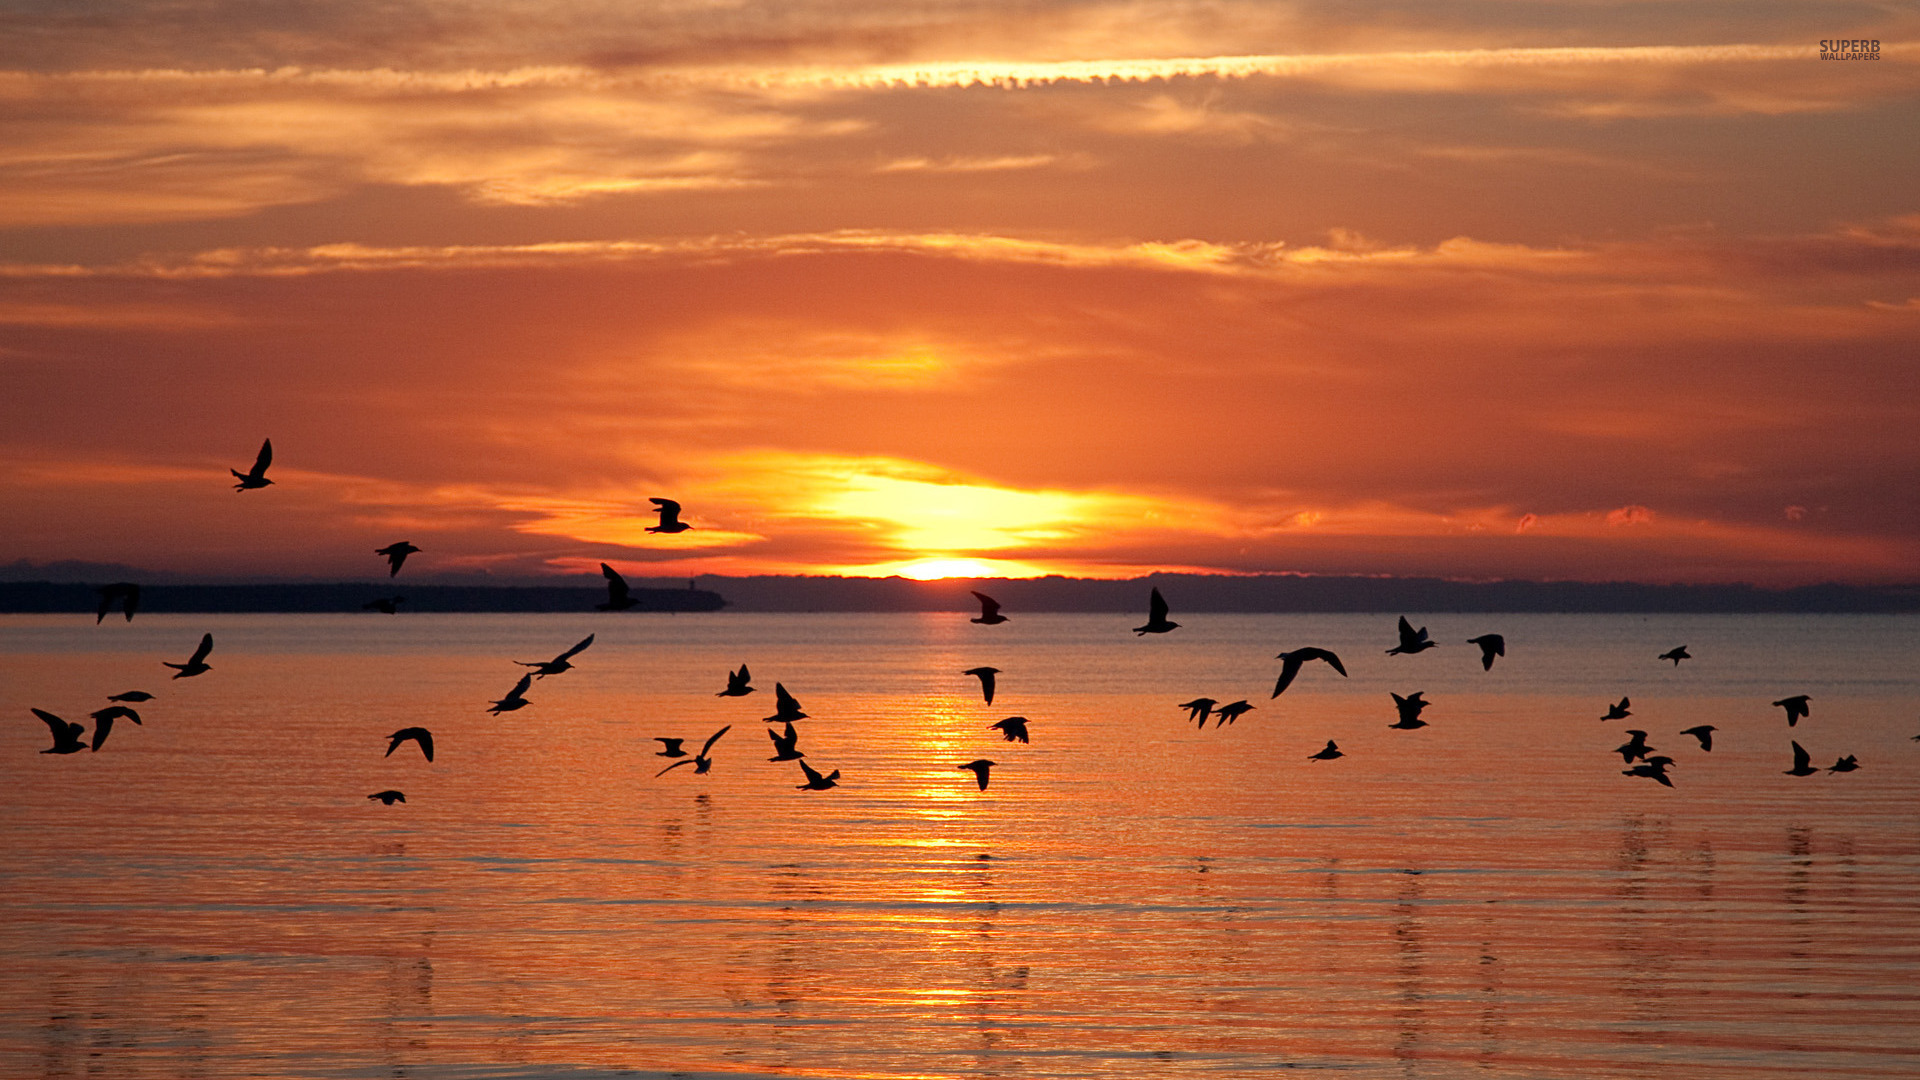 Birds flying at sunset wallpaper - Nature wallpapers - #45061